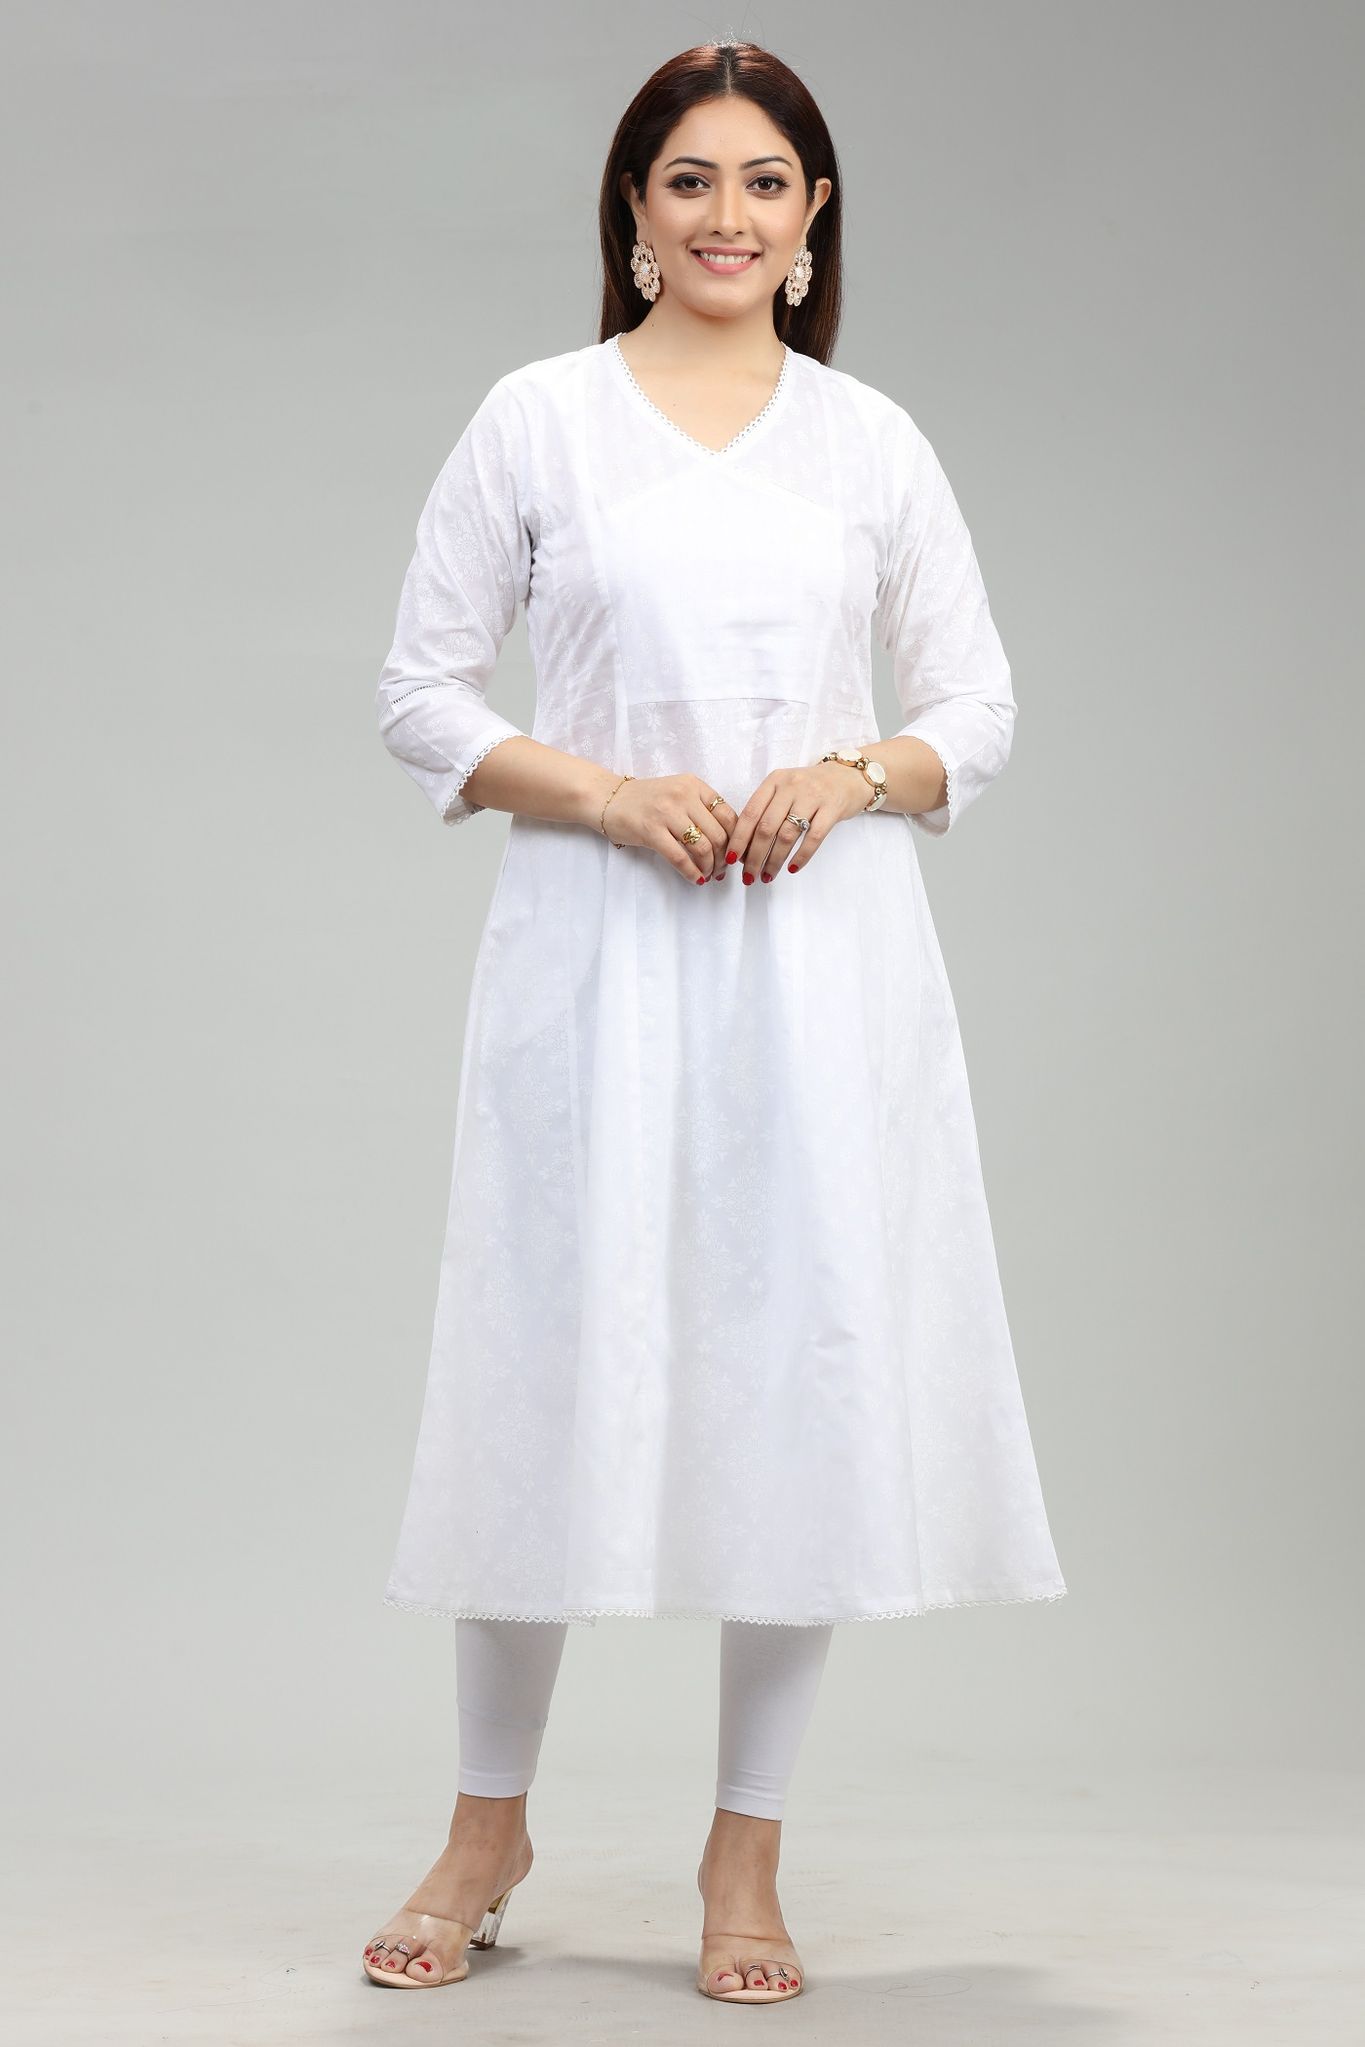 Buy White Ankle Length Pant Rayon for Best Price, Reviews, Free Shipping